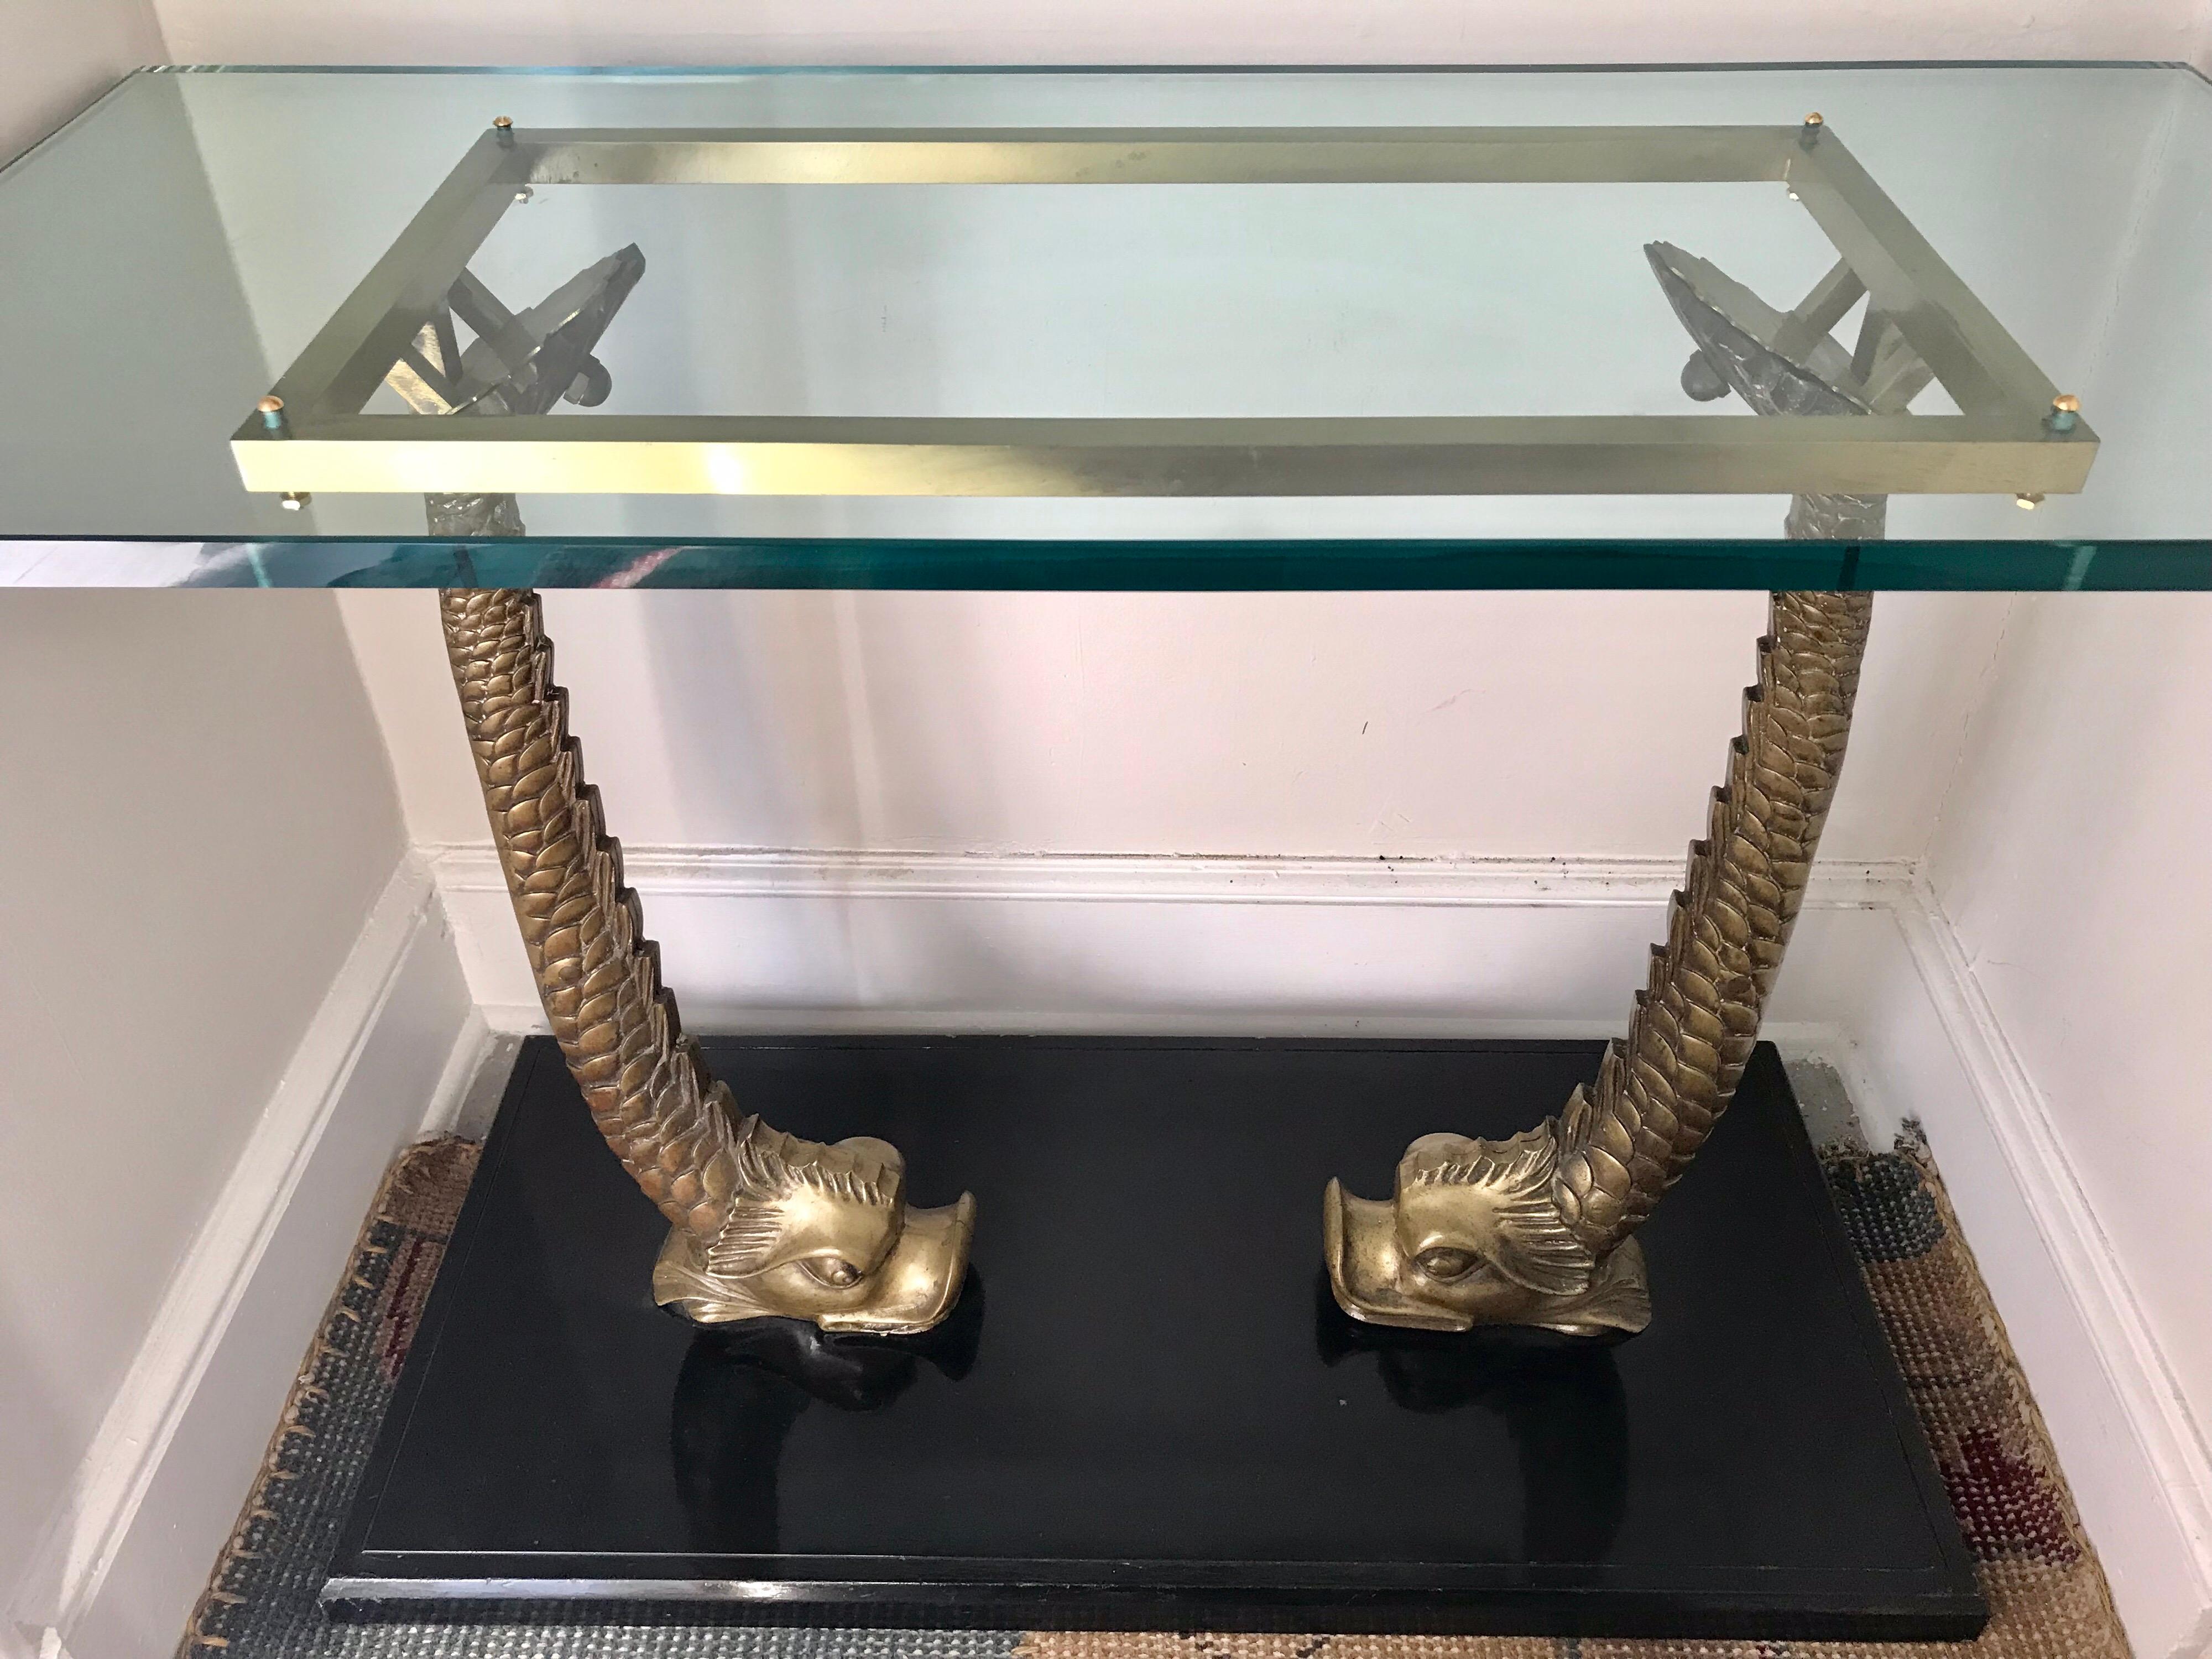 Vintage brass koi fish base with three quarter inch thick glass top. Mounted on a black painted wood base. Made in Italy.